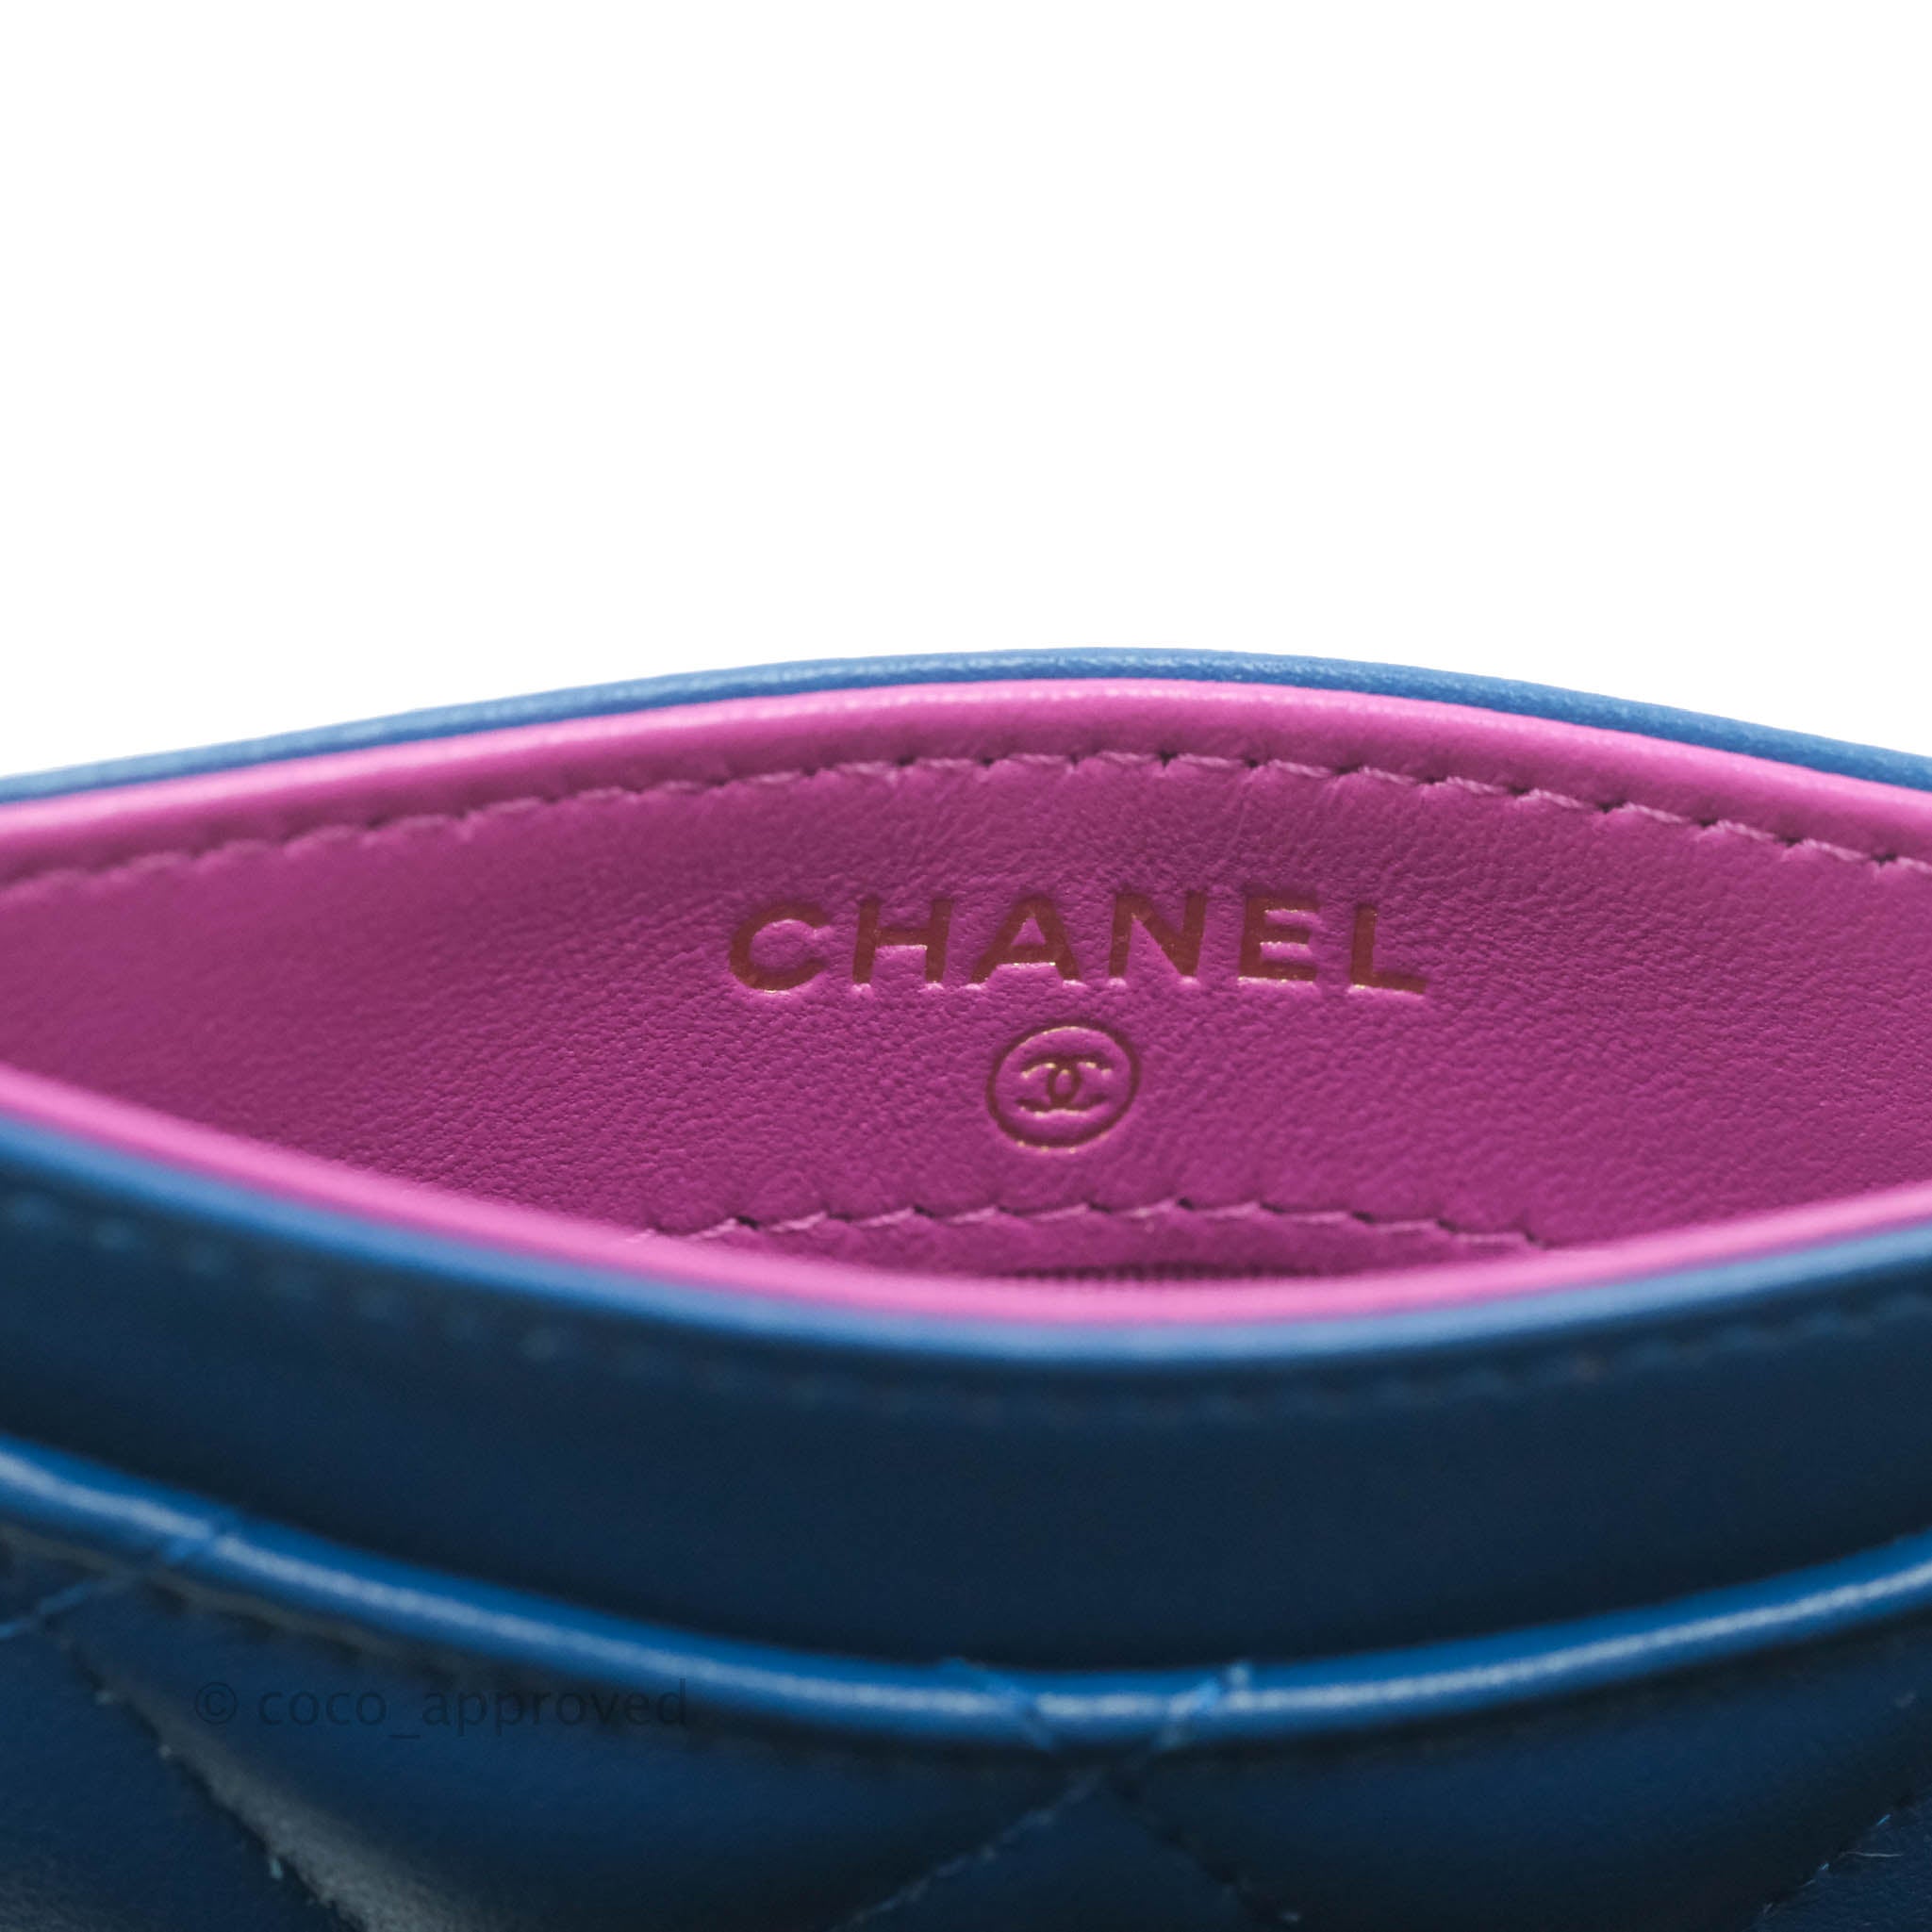 Chanel Lambskin Quilted CC Pearl Crush Wallet On Chain Blue with GHW